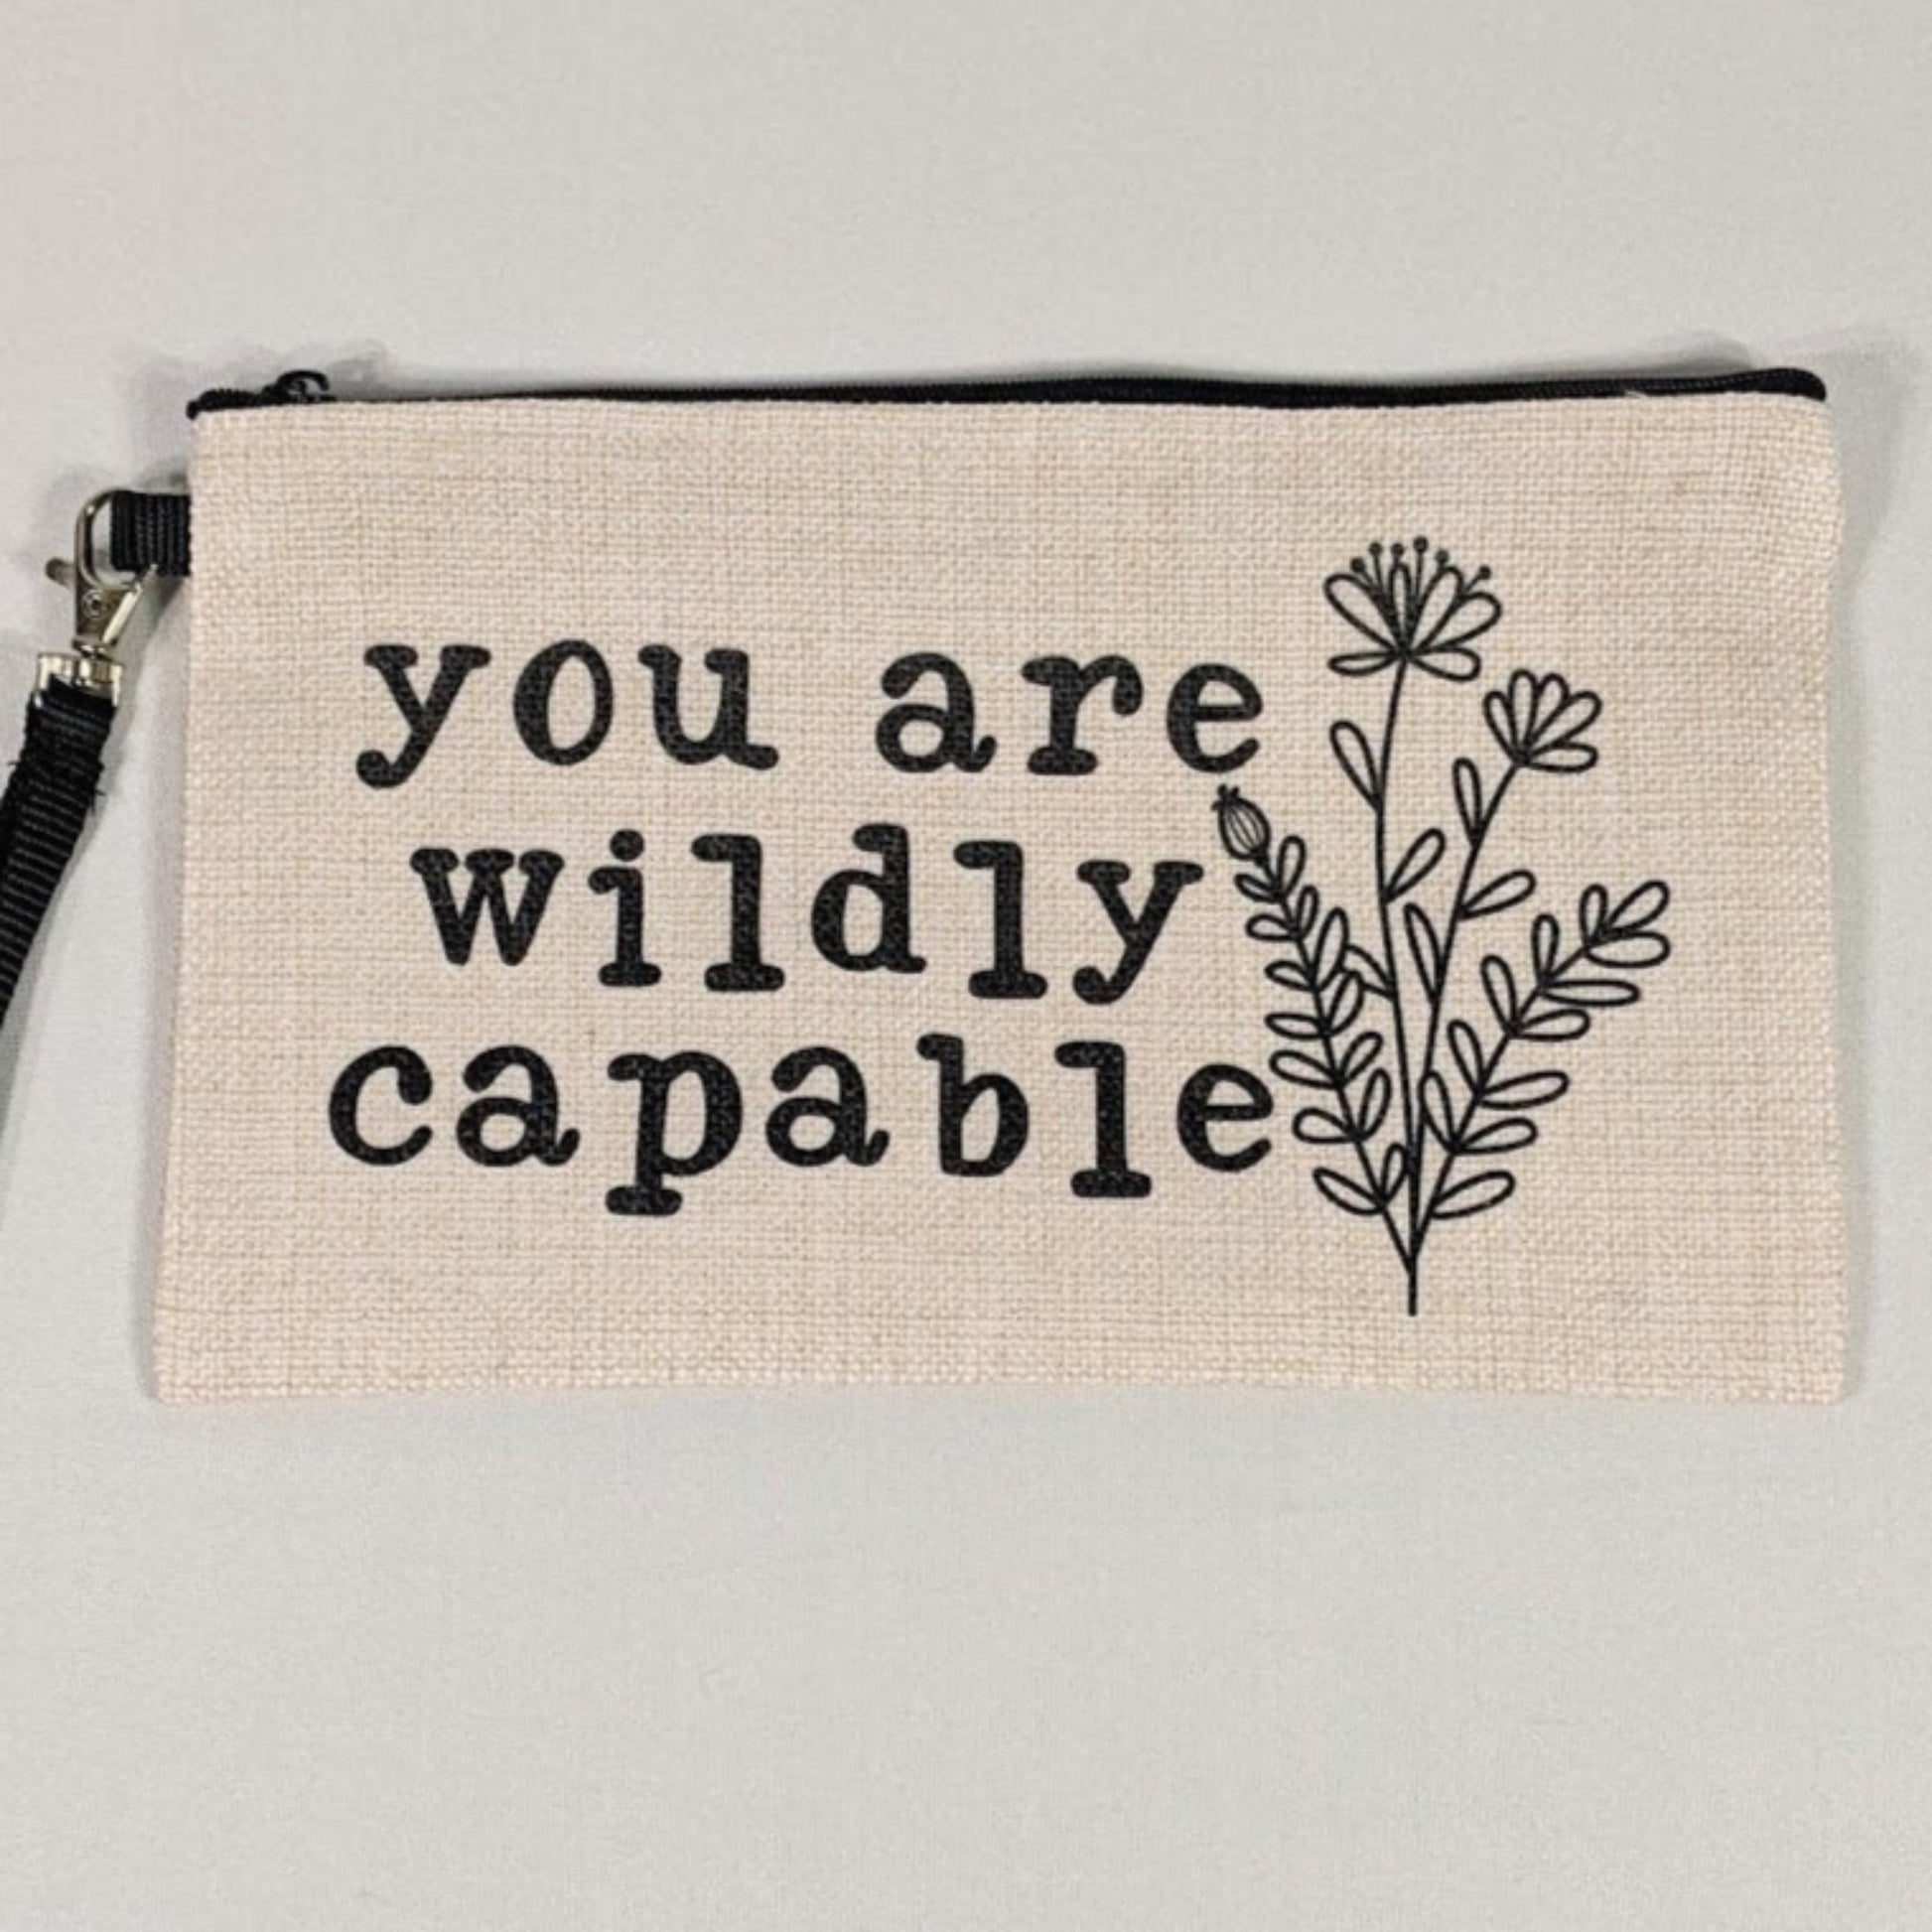 Fashionable Cosmetic Bag with Inspirational Design